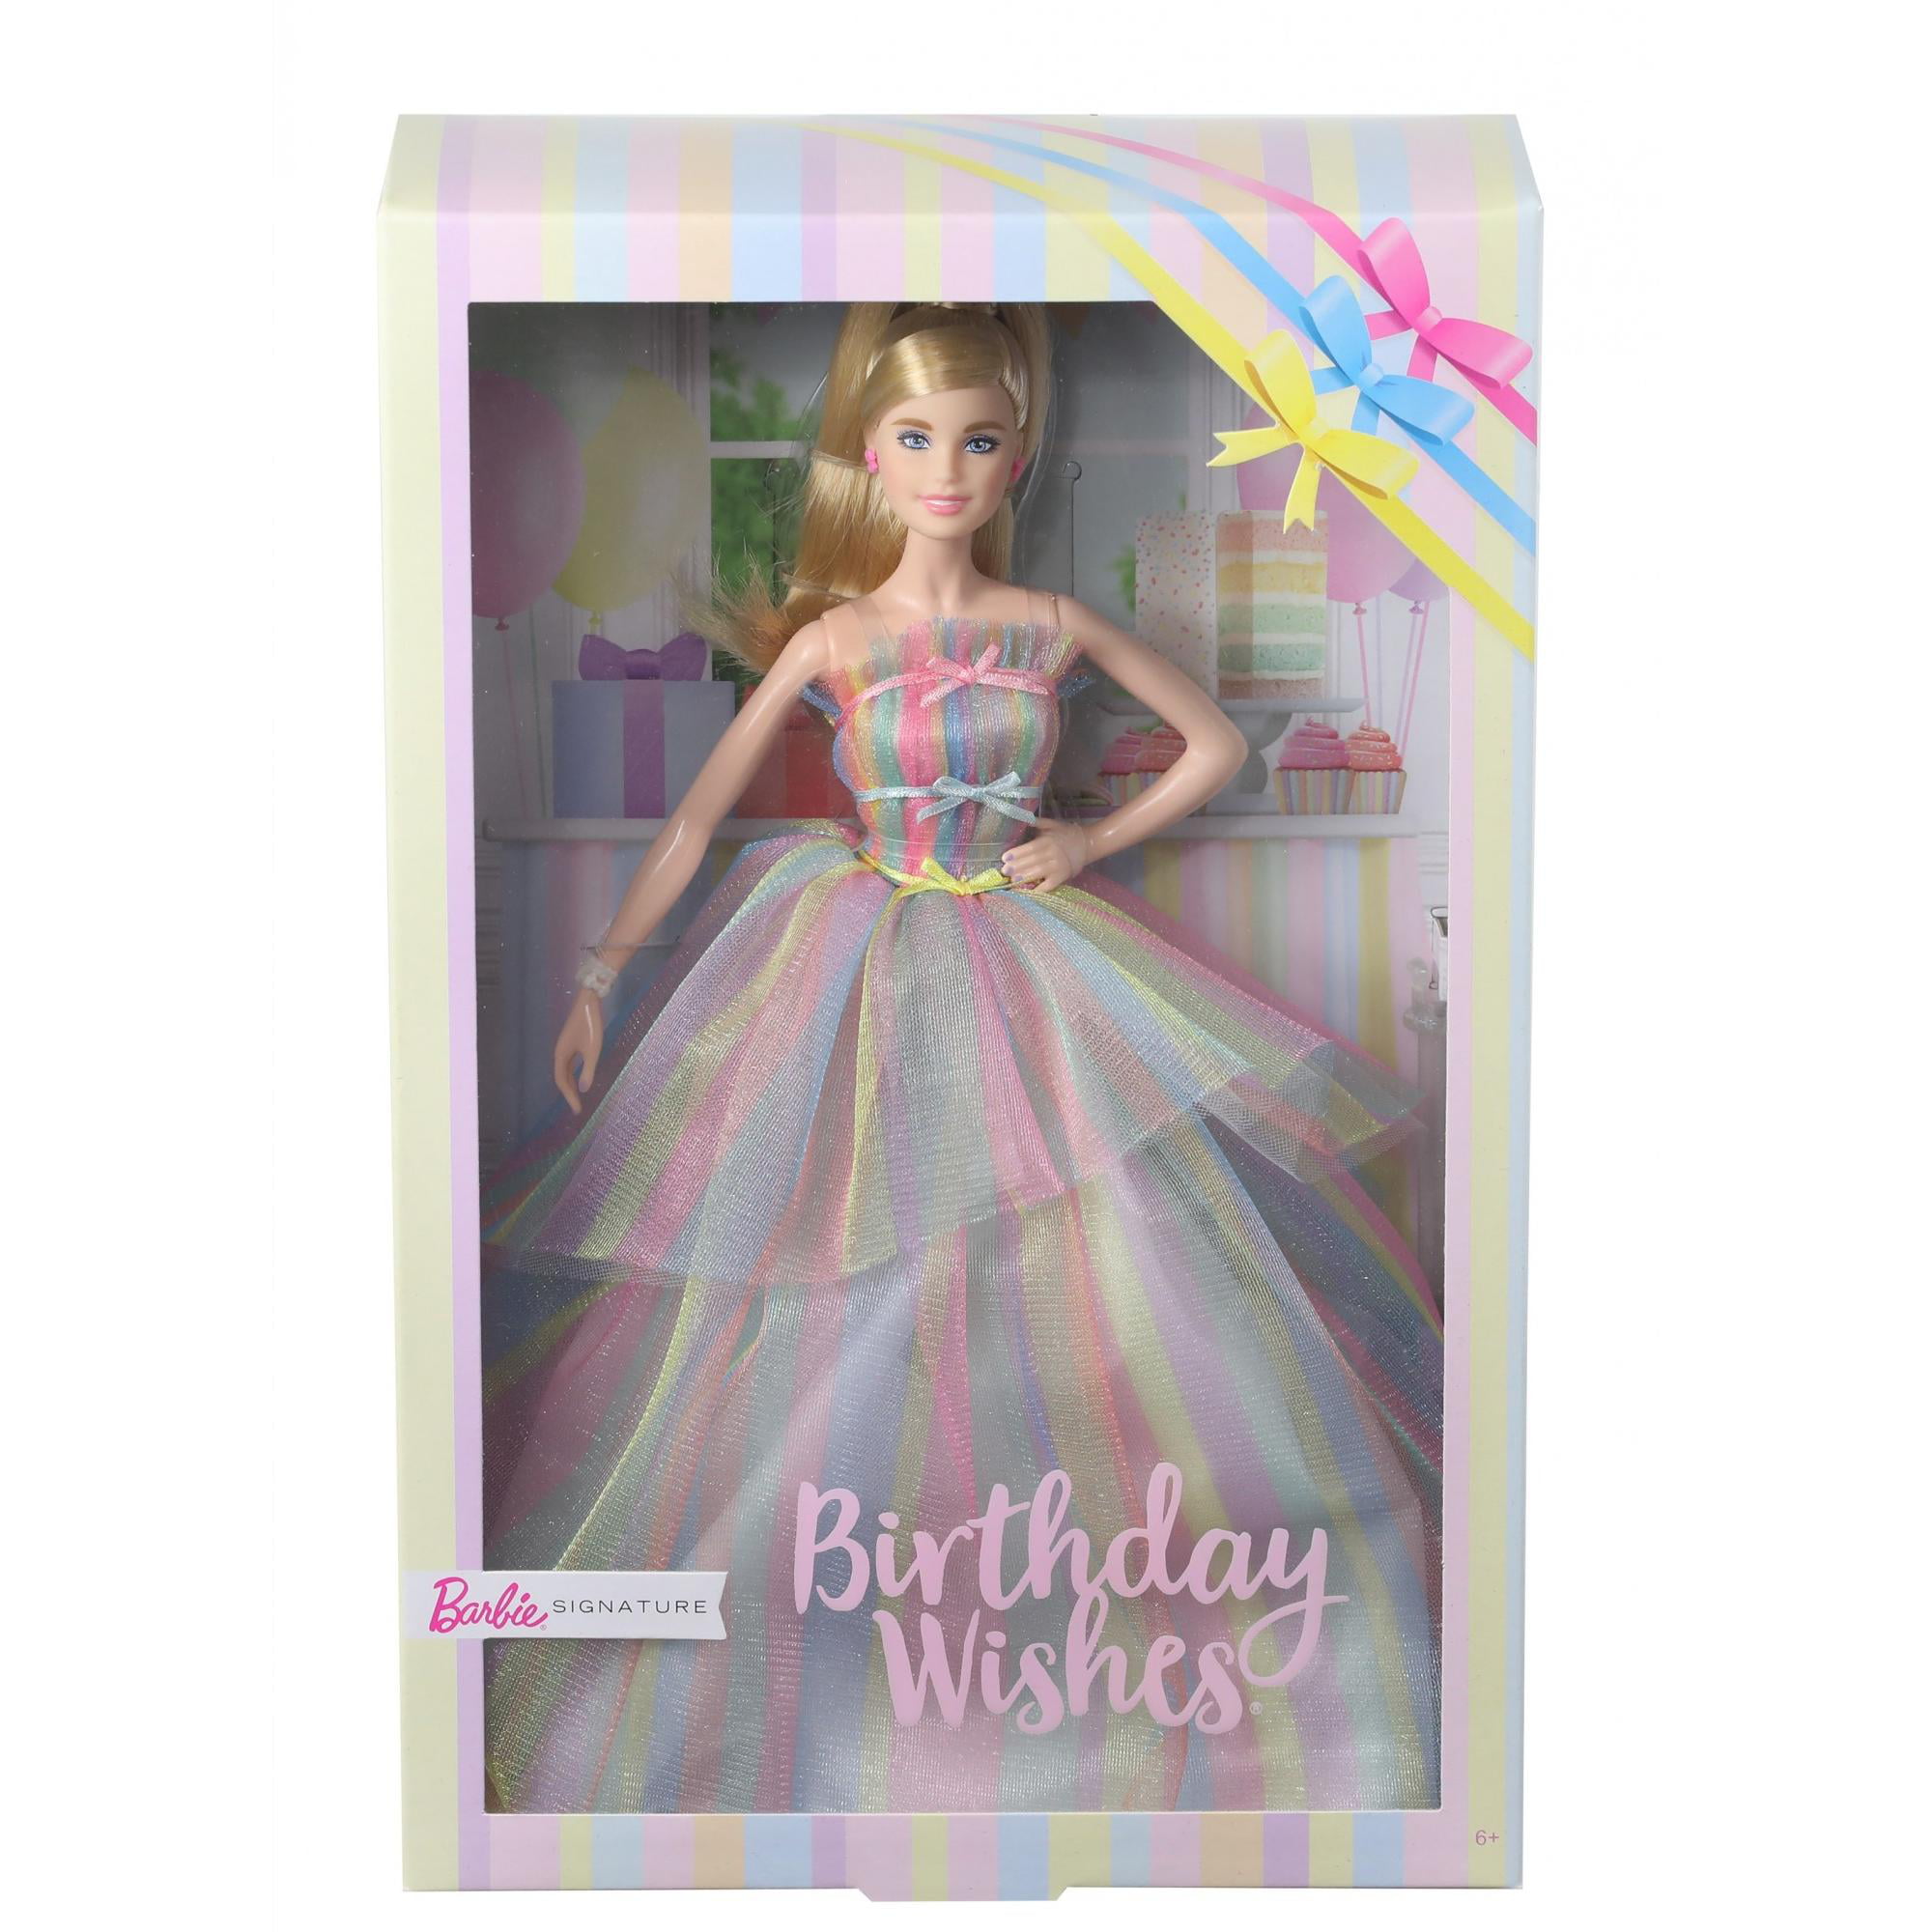 12-in Blonde in Rainbow Dress Barbie Signature Birthday Wishes Doll Multi Approx